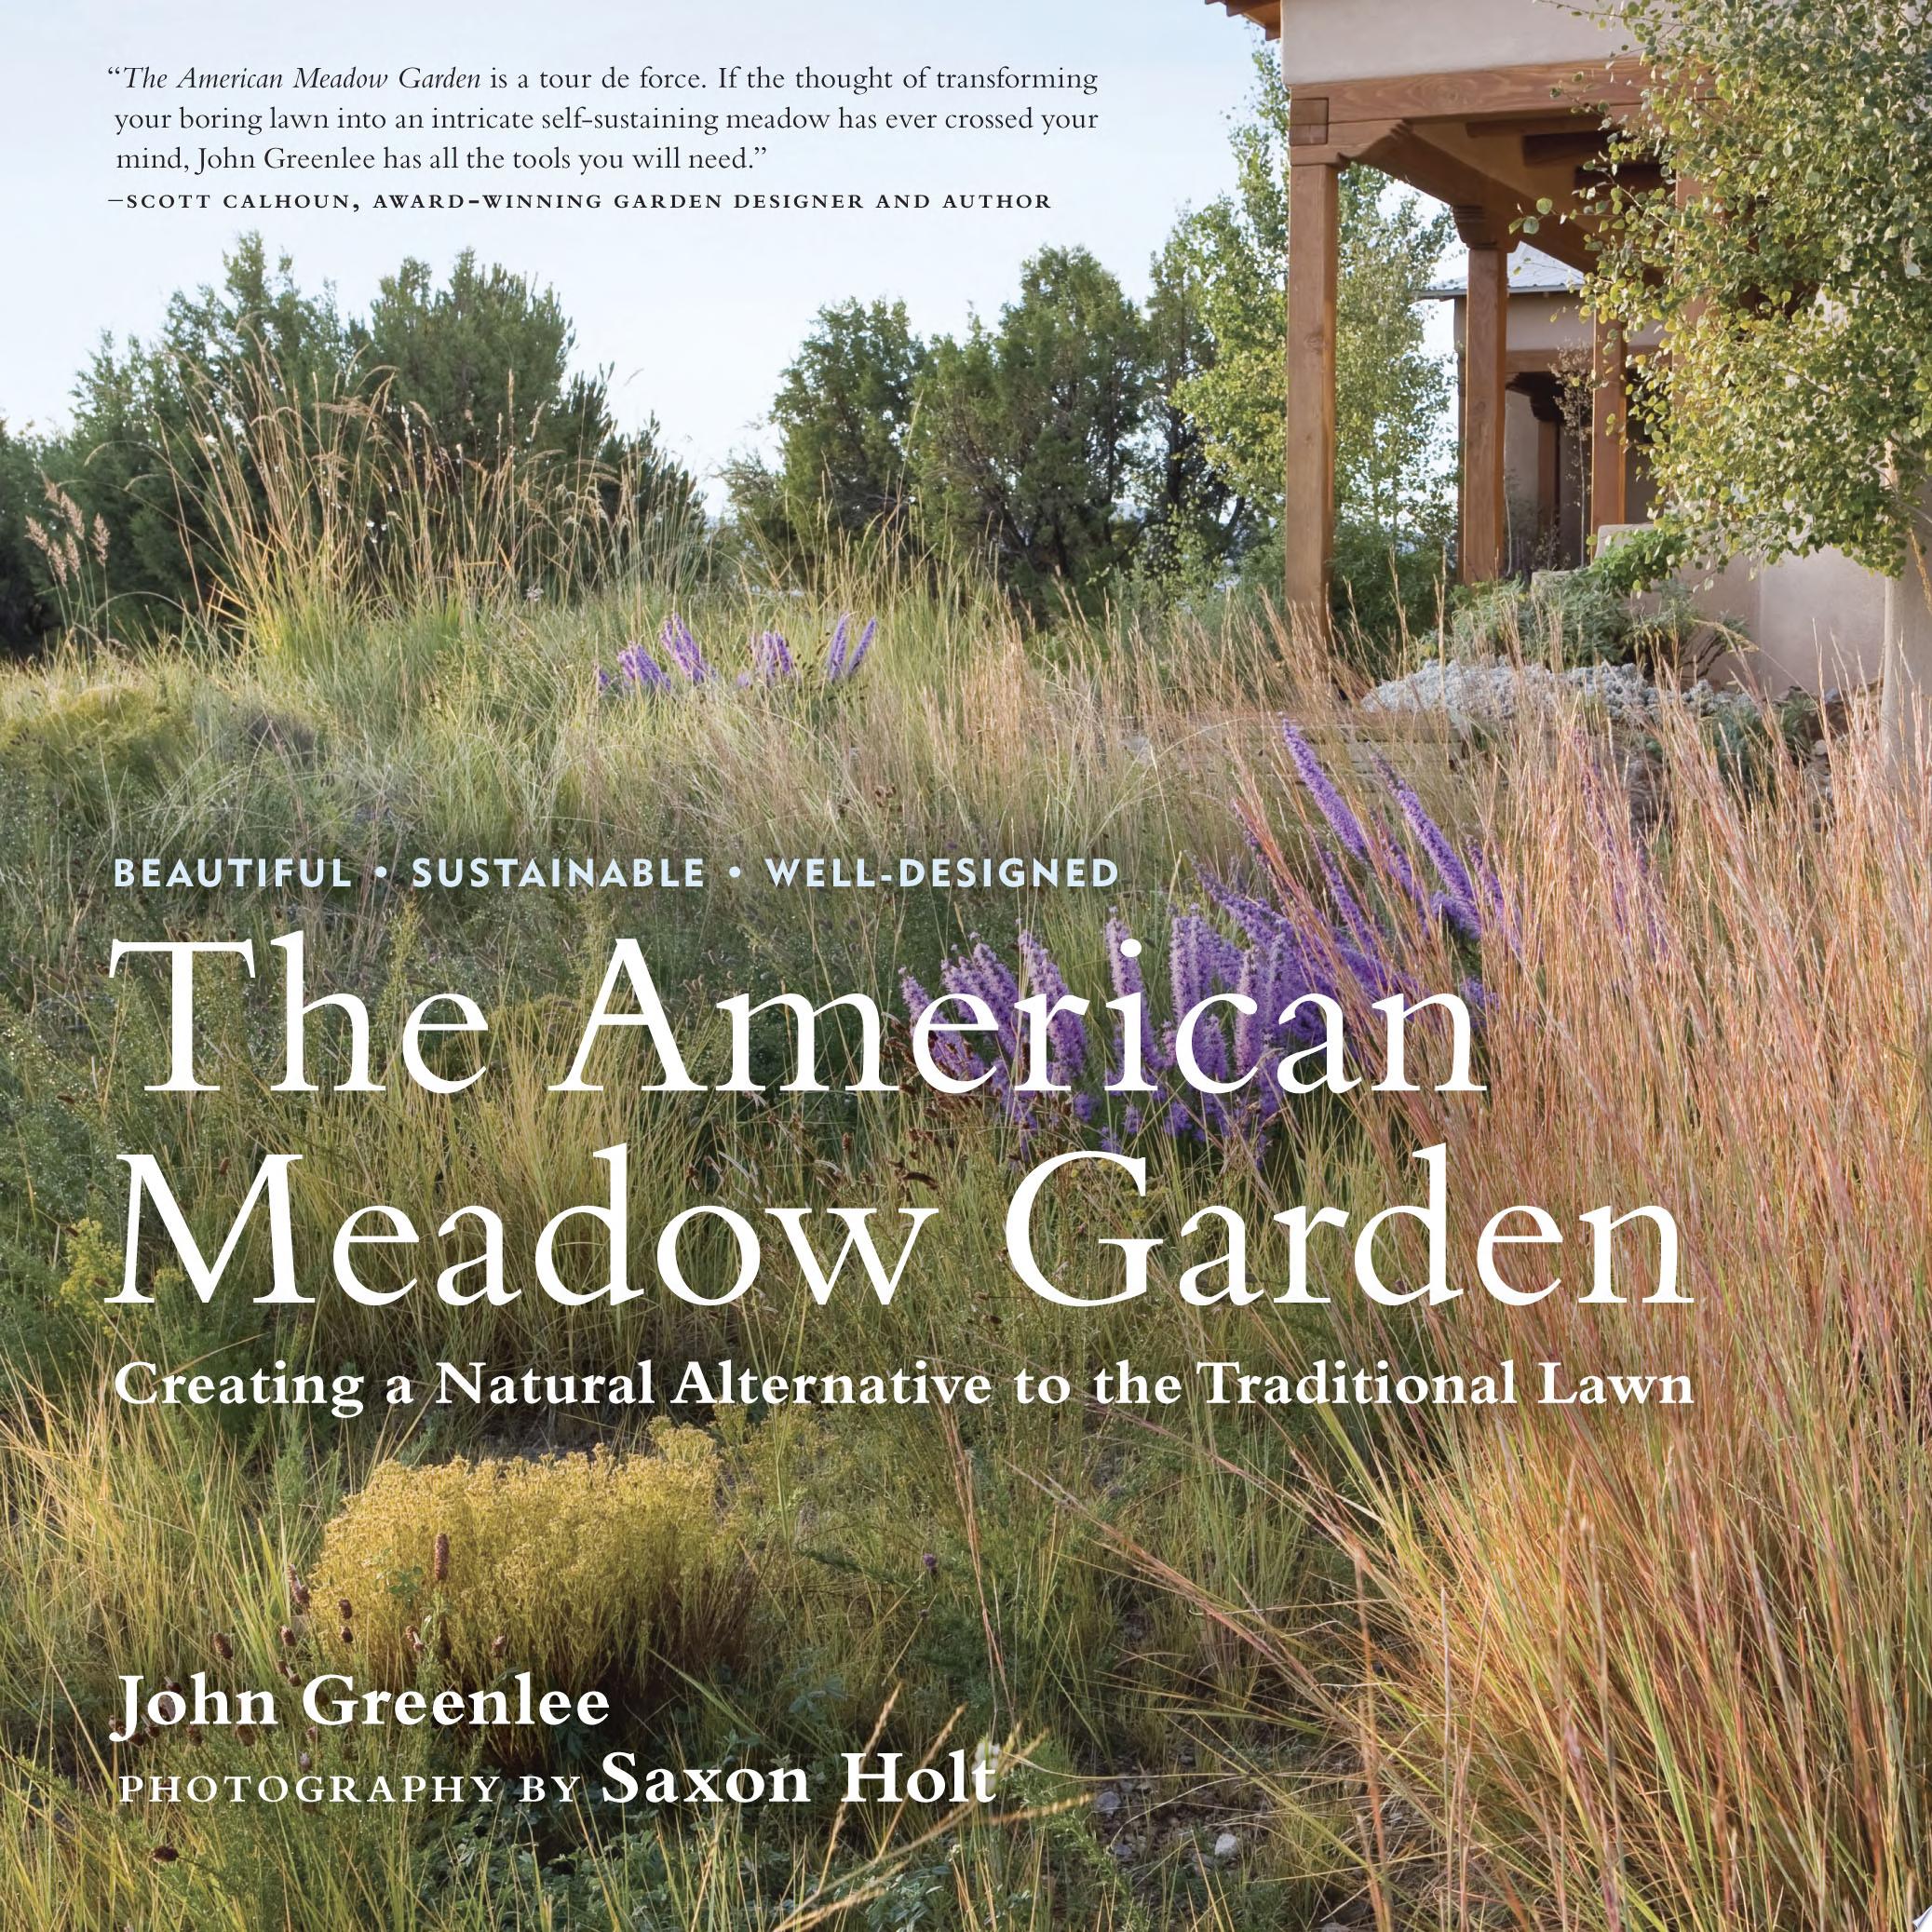 Image for "The American Meadow Garden"